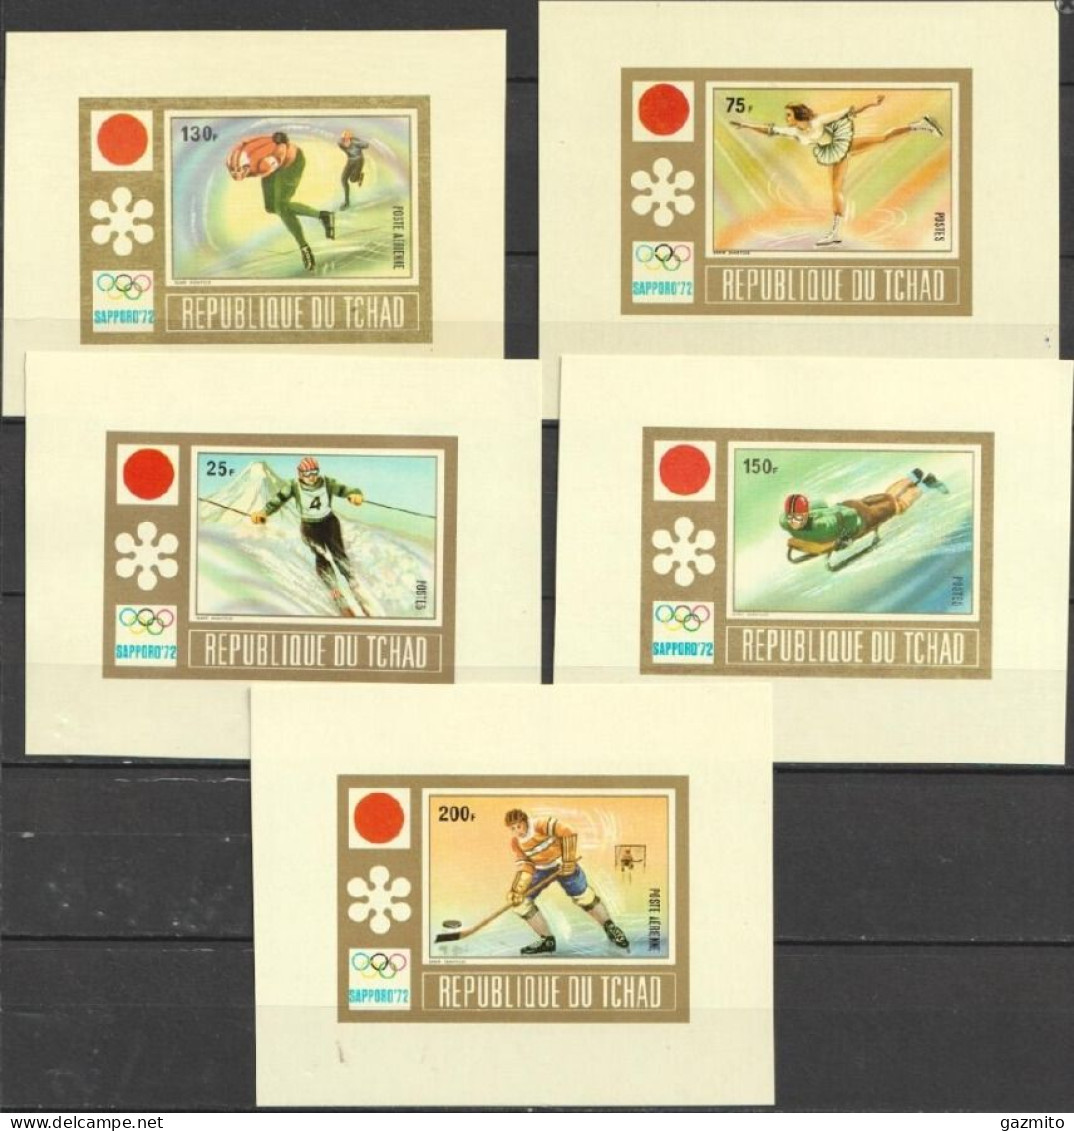 Tchad 1972, Olympic Games In Sapporo, Skiing, Skating, Ice Hockey, 5BF IMPERFORATED - Eishockey